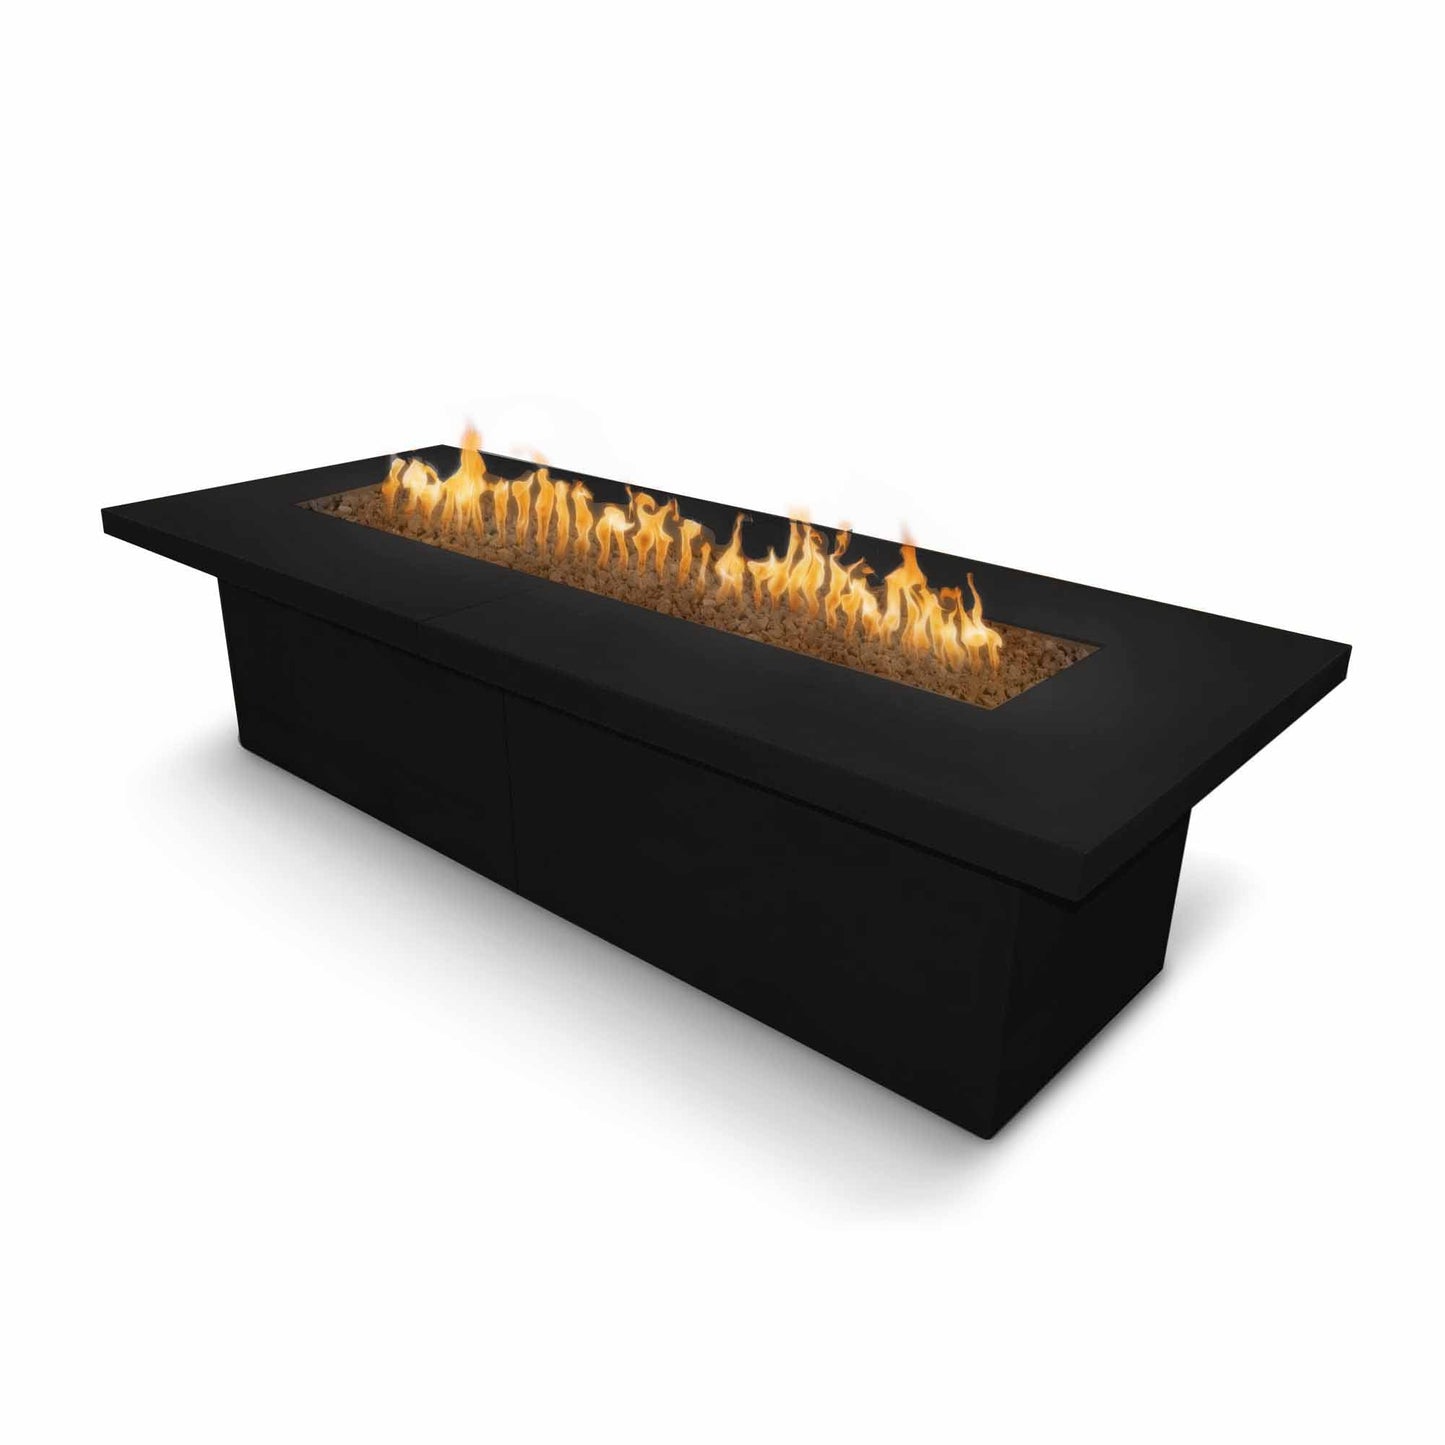 The Outdoor Plus Rectangular Newport 144" Corten Steel Natural Gas Fire Pit with 110V Electronic Ignition